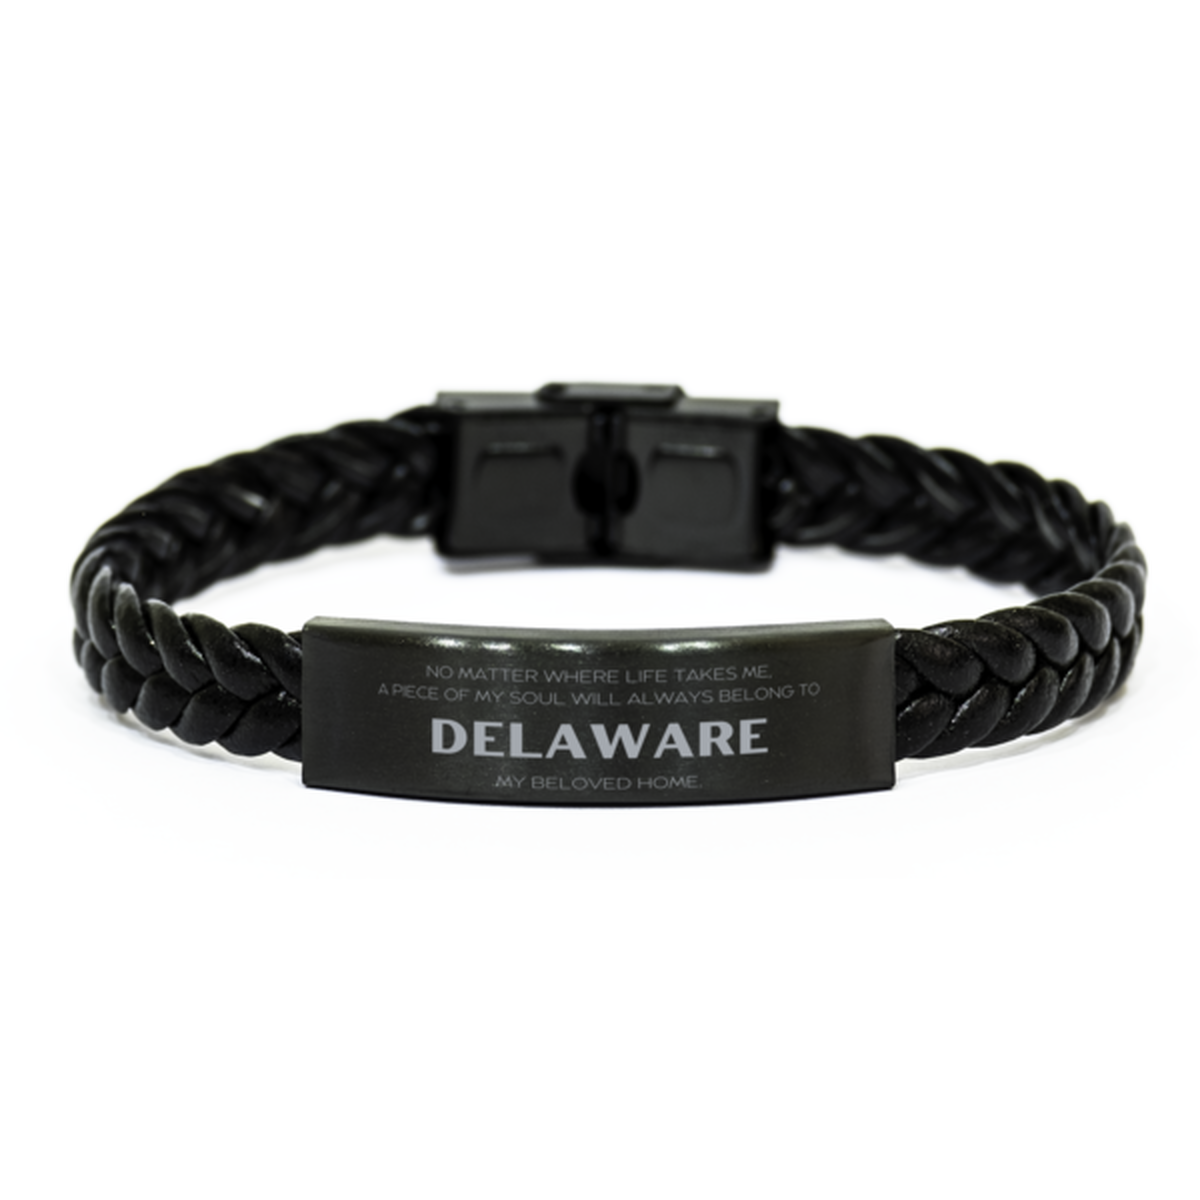 Love Delaware State Gifts, My soul will always belong to Delaware, Proud Braided Leather Bracelet, Birthday Unique Gifts For Delaware Men, Women, Friends